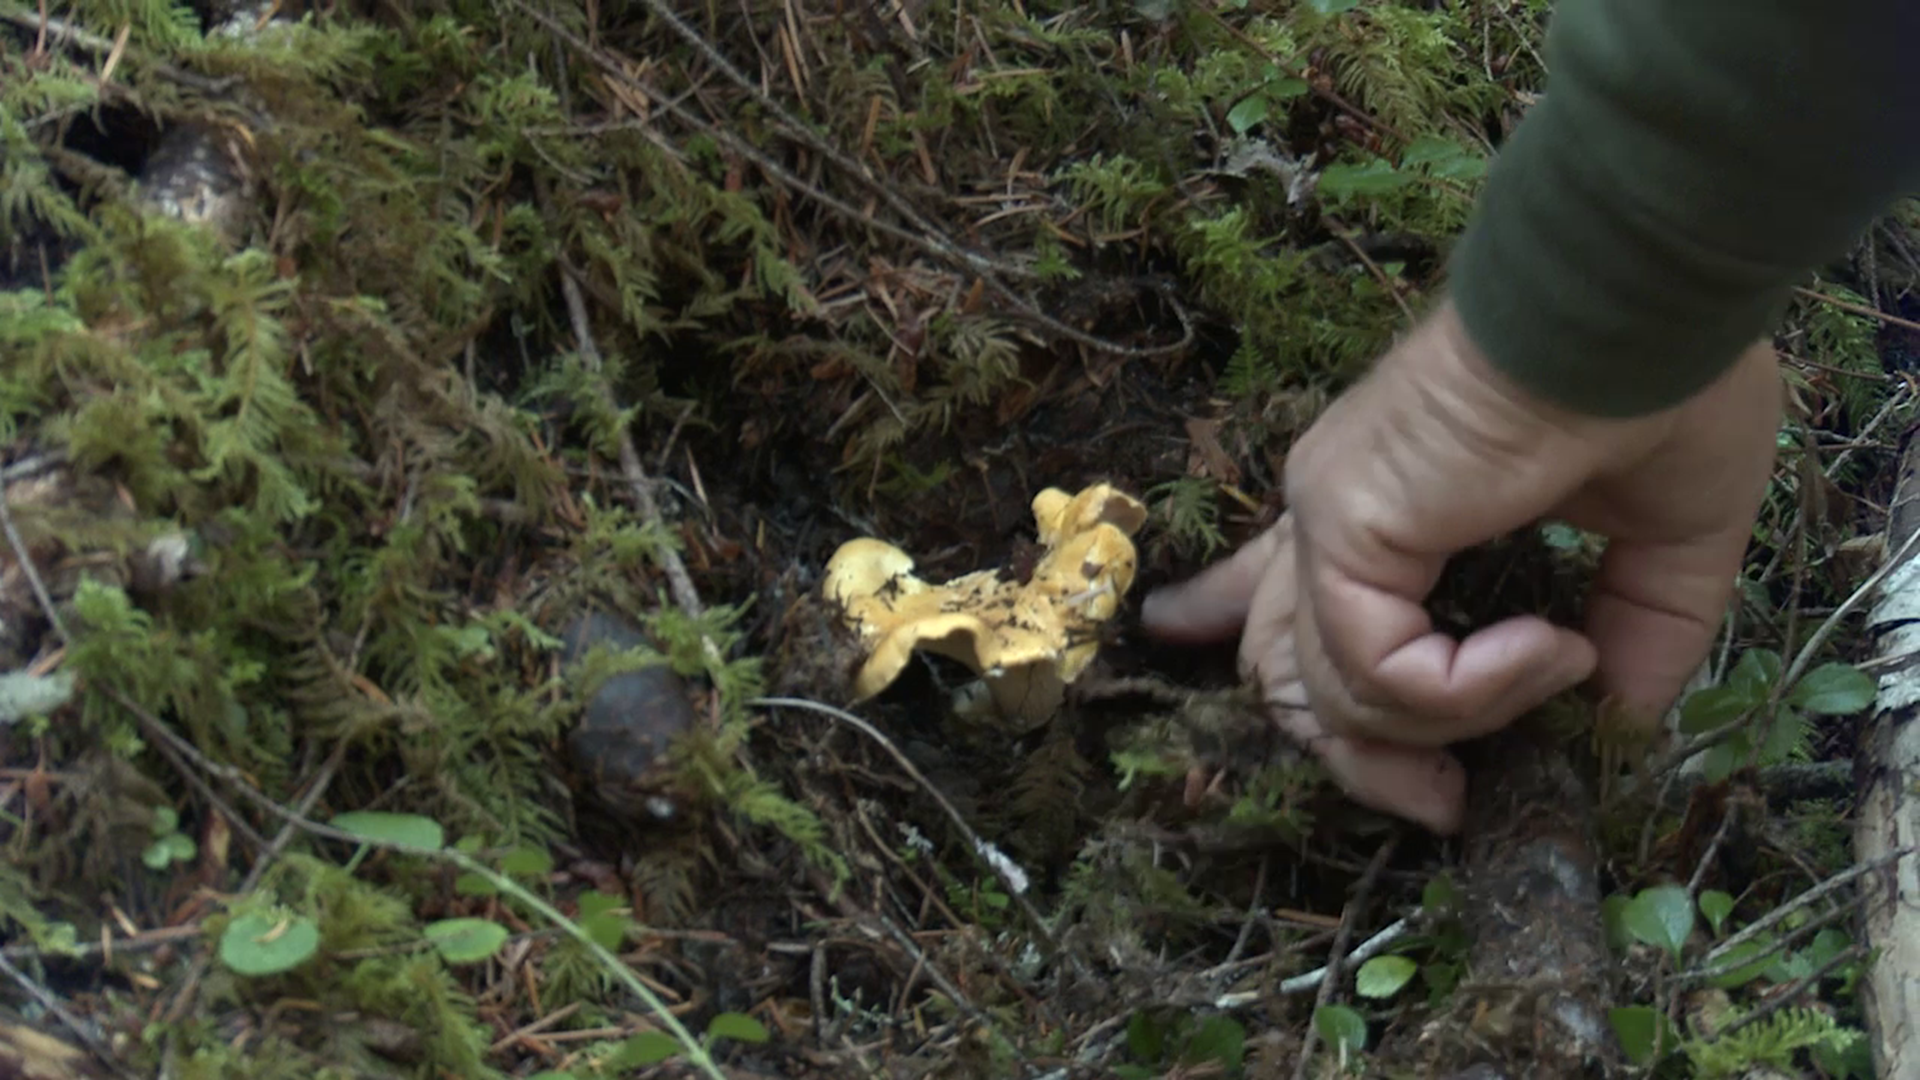 Fall is one of the best times of the year to go foraging for wild mushrooms. Grant McOmie went hunting for chanterelles in the Tillamook State Forest.